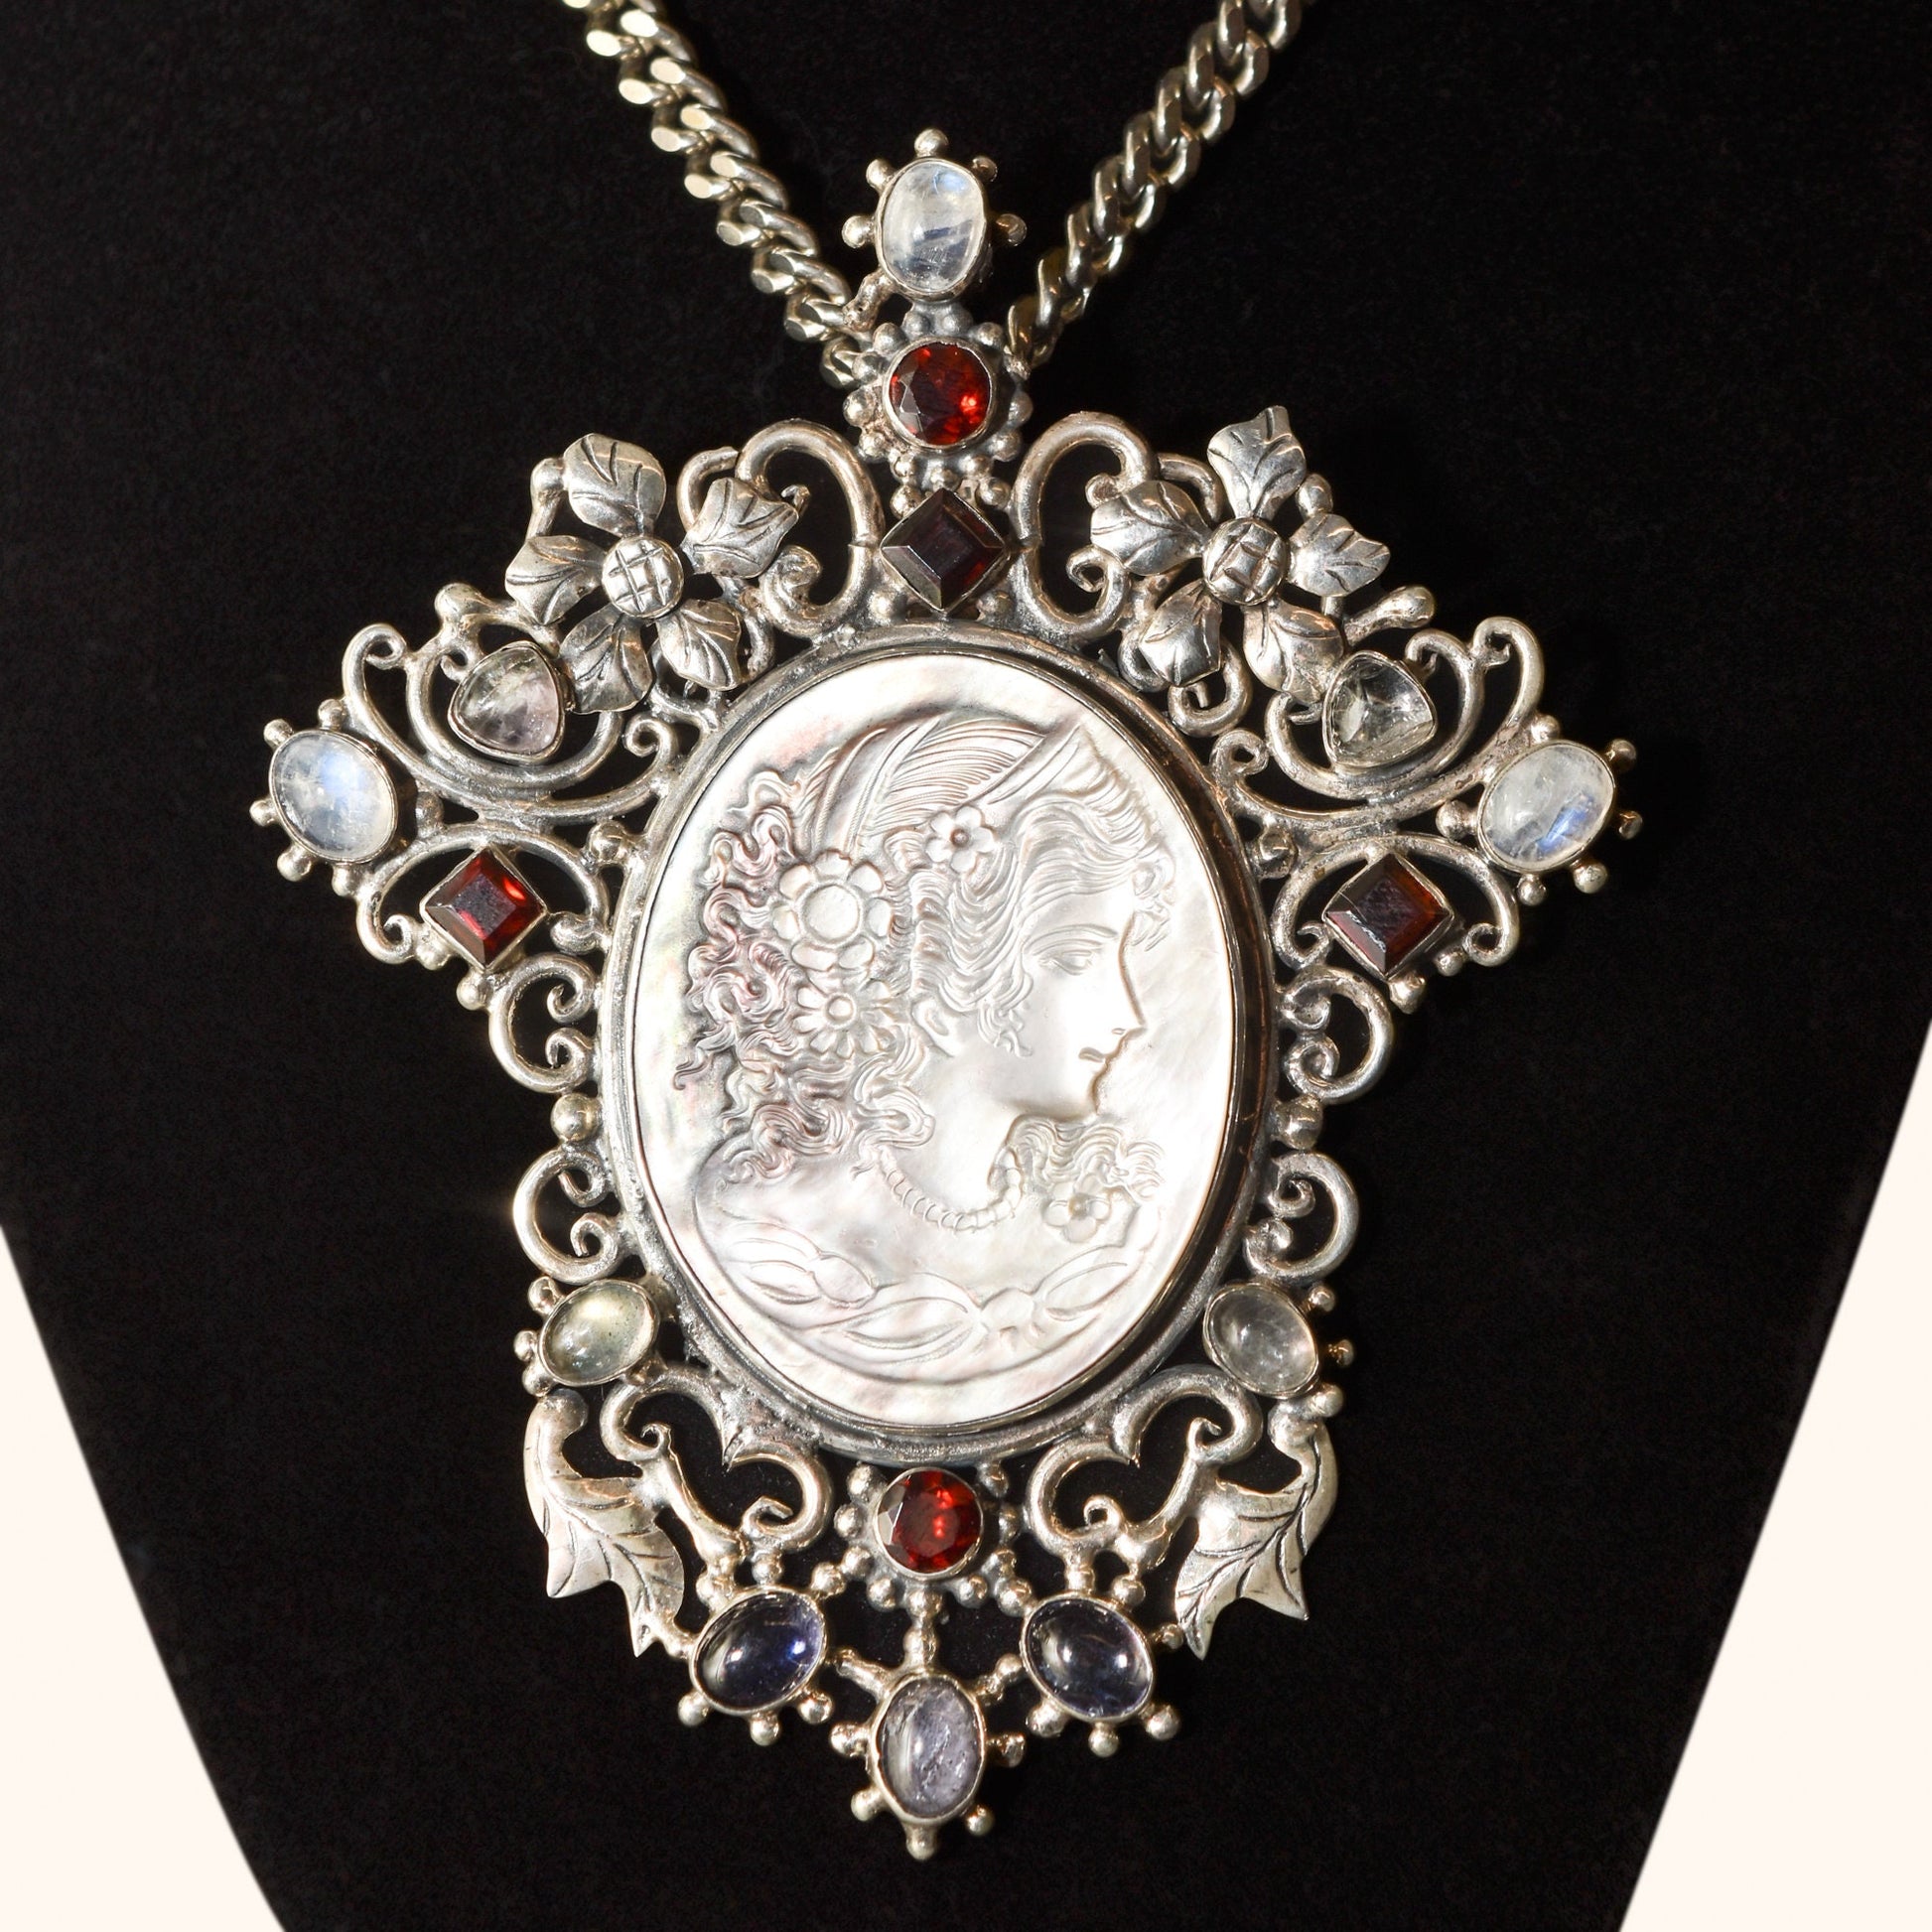 Victorian-style cameo pendant brooch in sterling silver with large ornate multi-stone design, measuring 4 inches long, displayed on a black background.